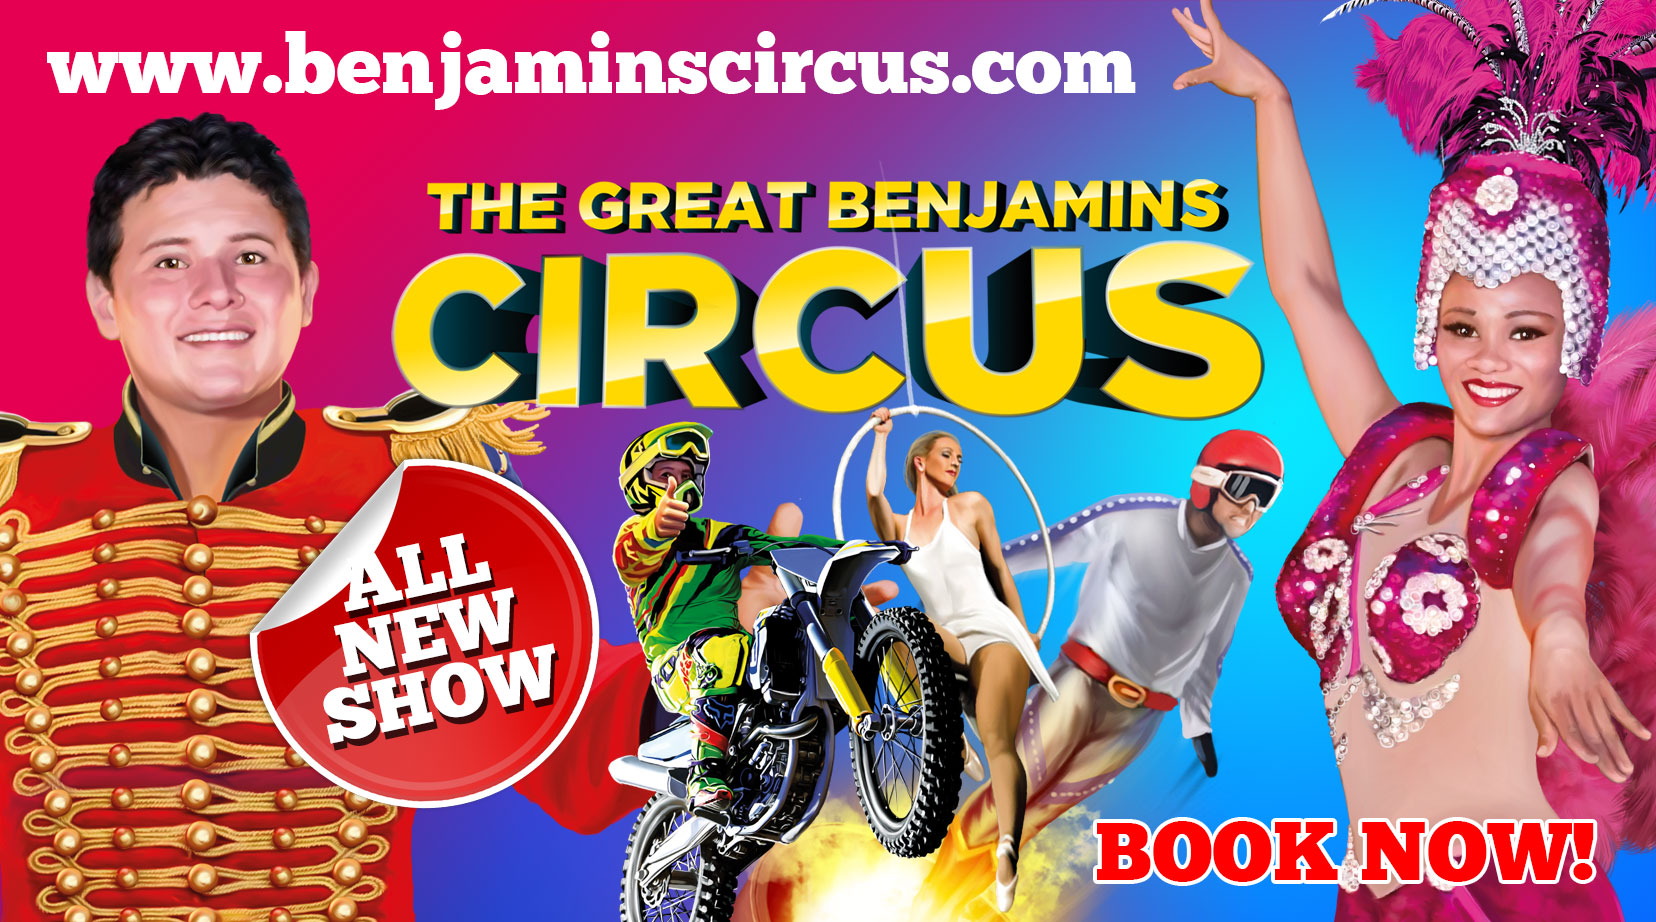 The Great Benjamins Circus is Coming to Rochester And You Could Win Tickets